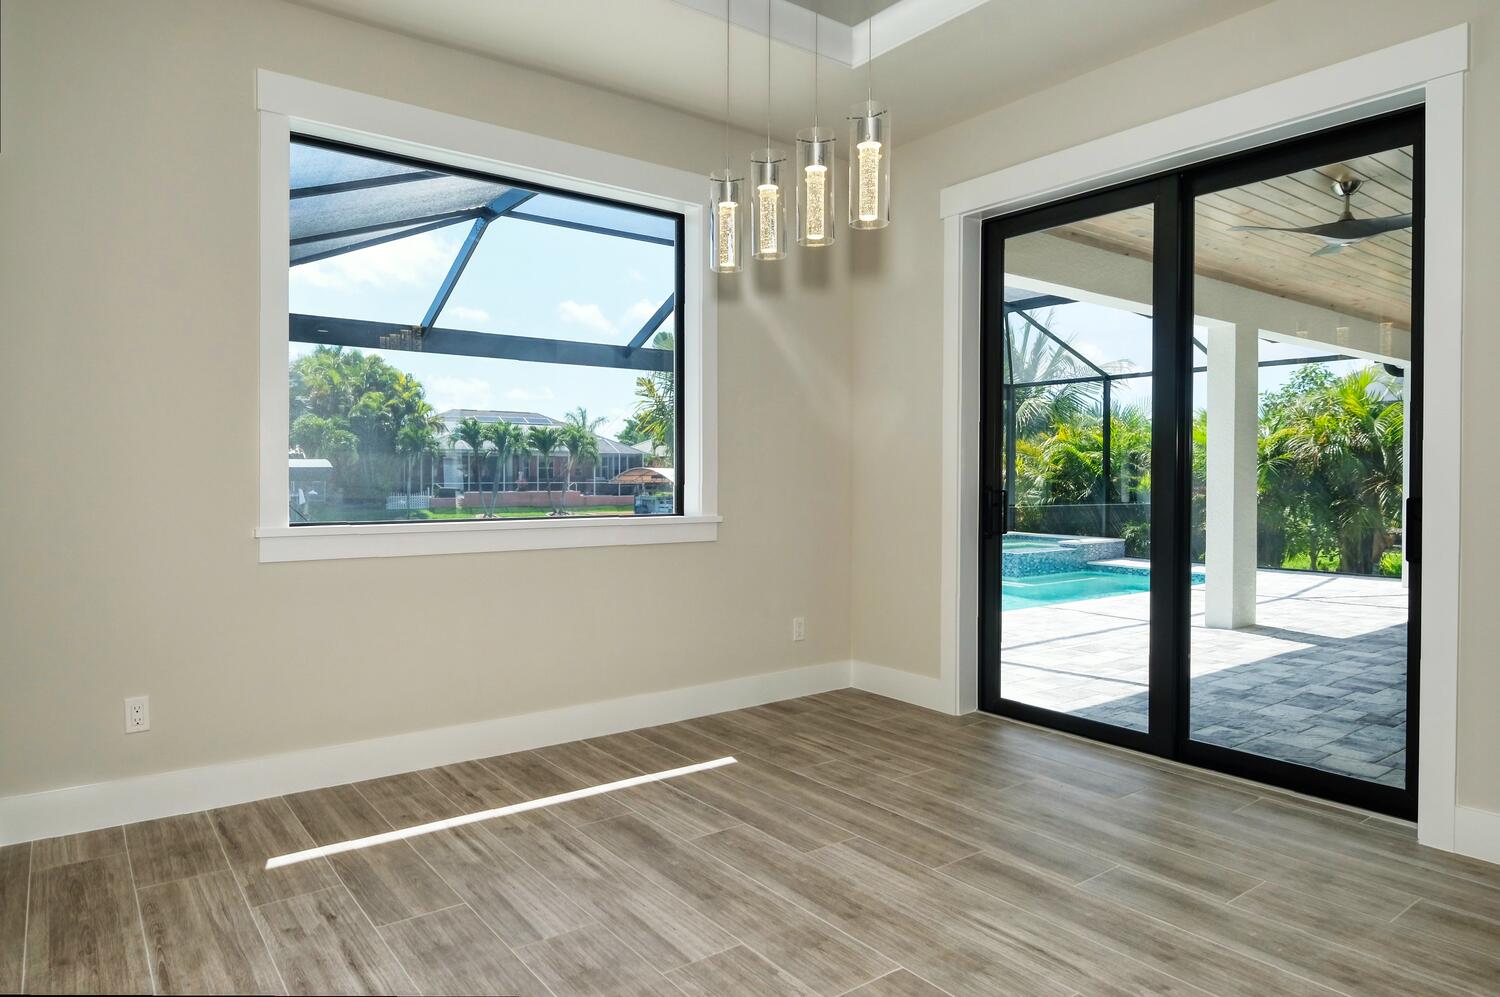 Picture of the dining area with pool view of the model home Serenity